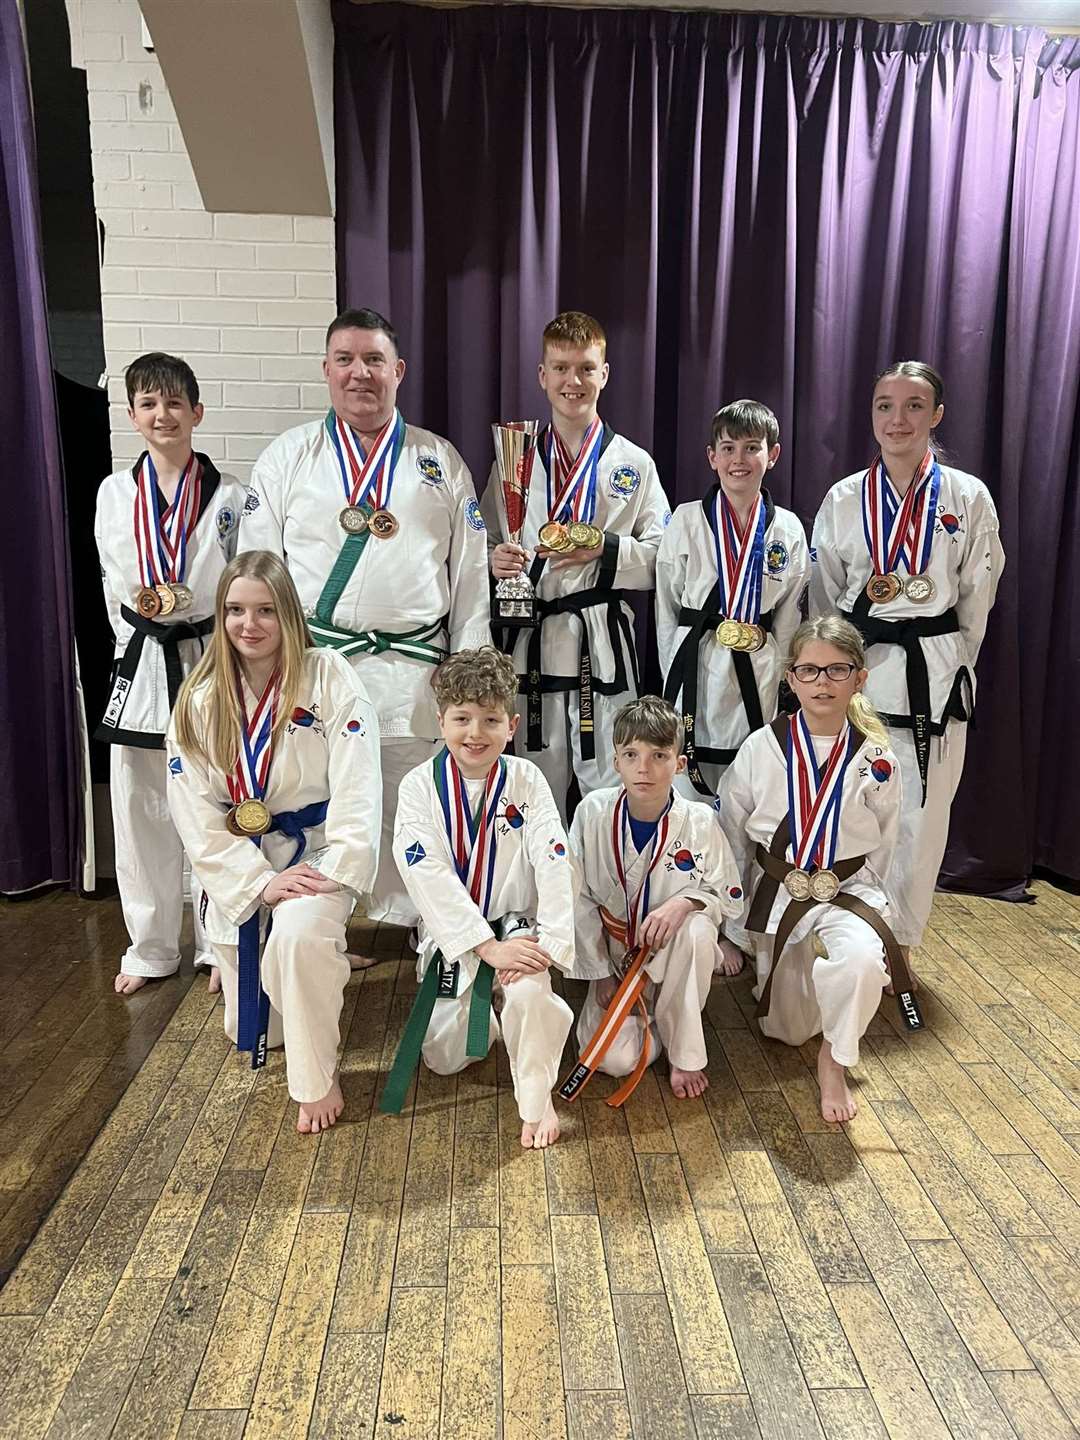 Some of the DKMA British championship medallists.